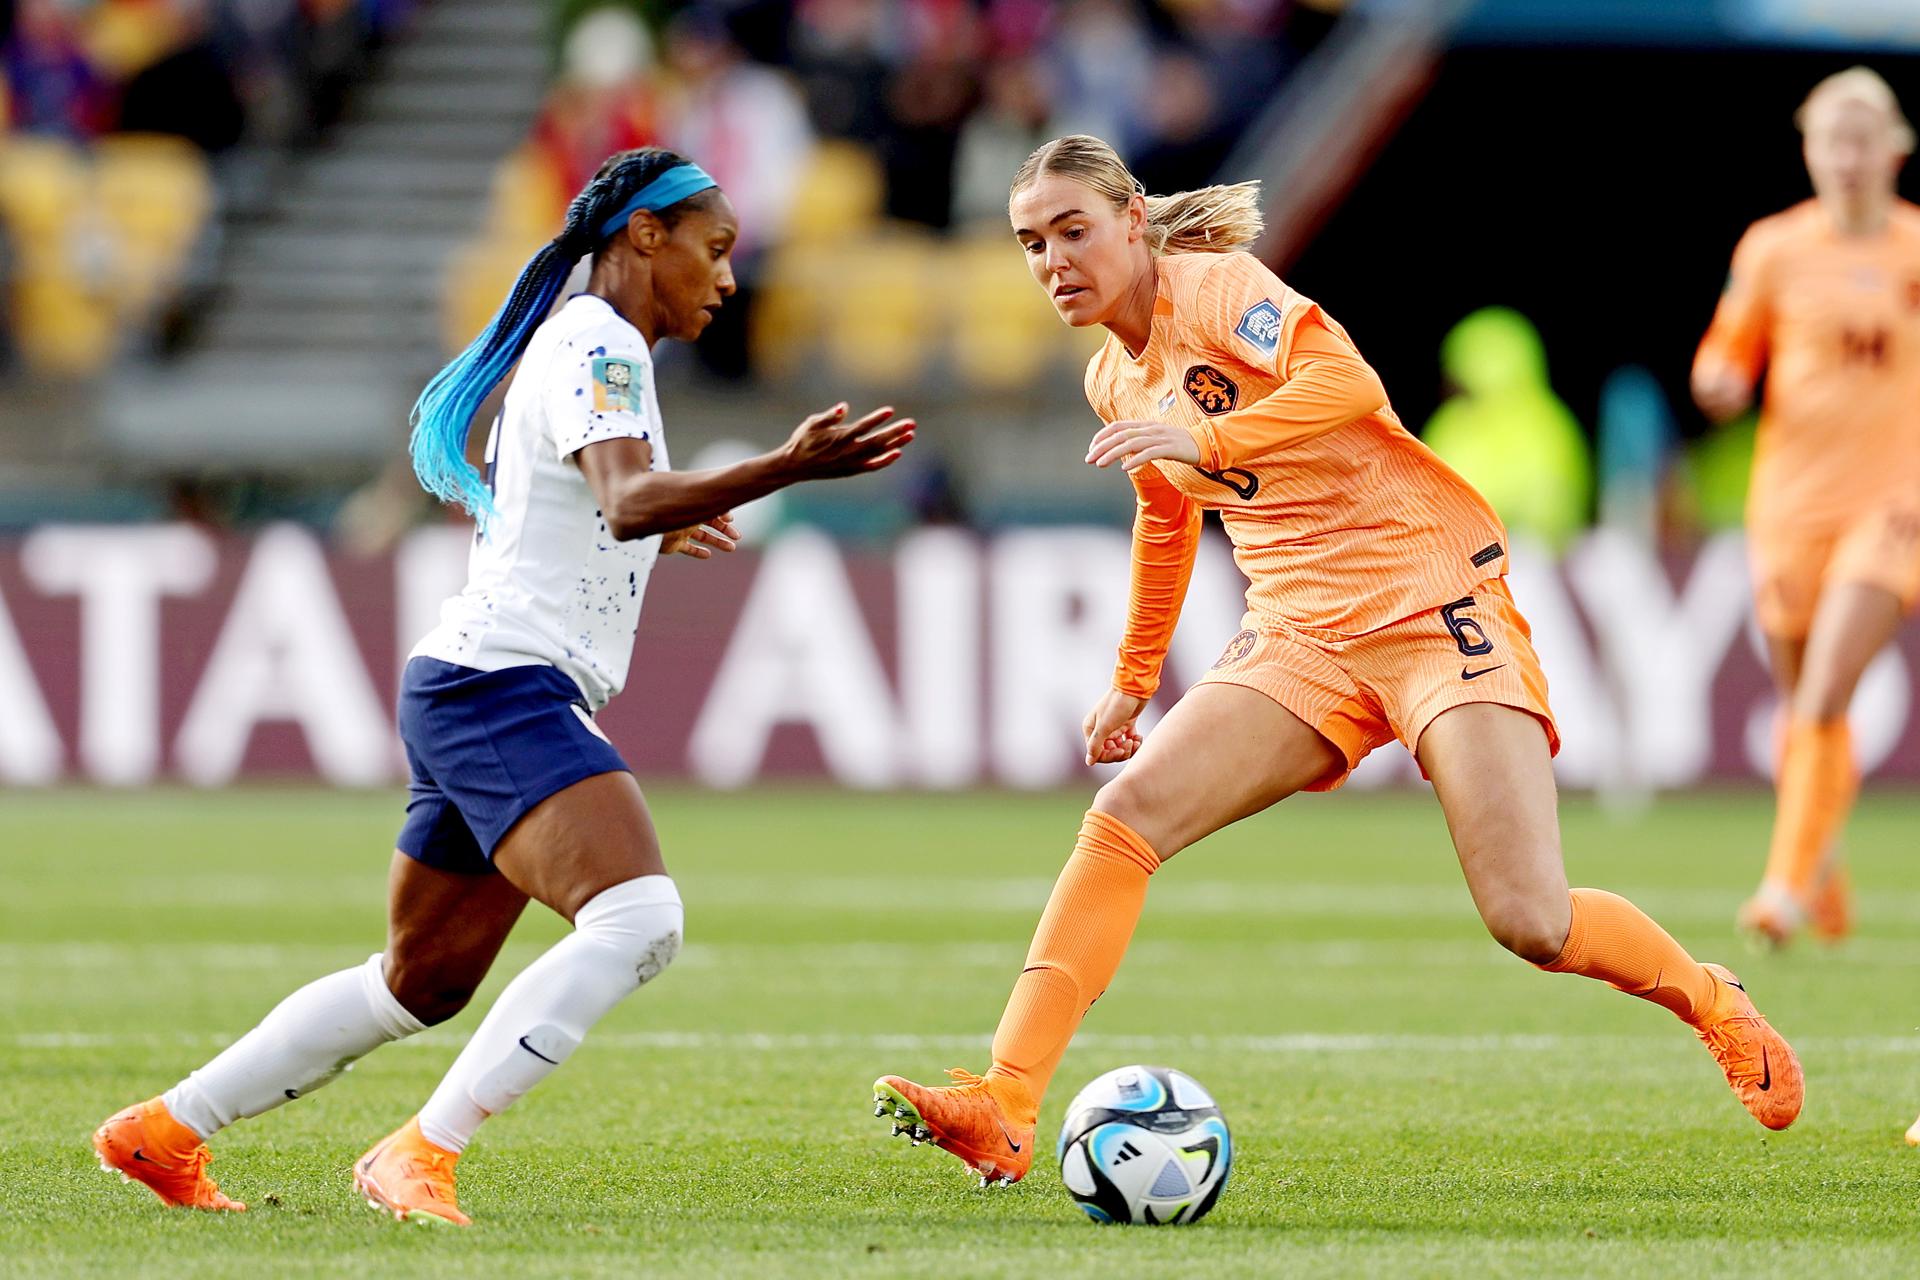 Jill Roord (R) of the Netherlands fights for the ball with Crystal Soubier of the USA during the FIFA Women's World Cup Group E match in Wellington, New Zealand. EFE/EPA/RITCHIE B. TONGO